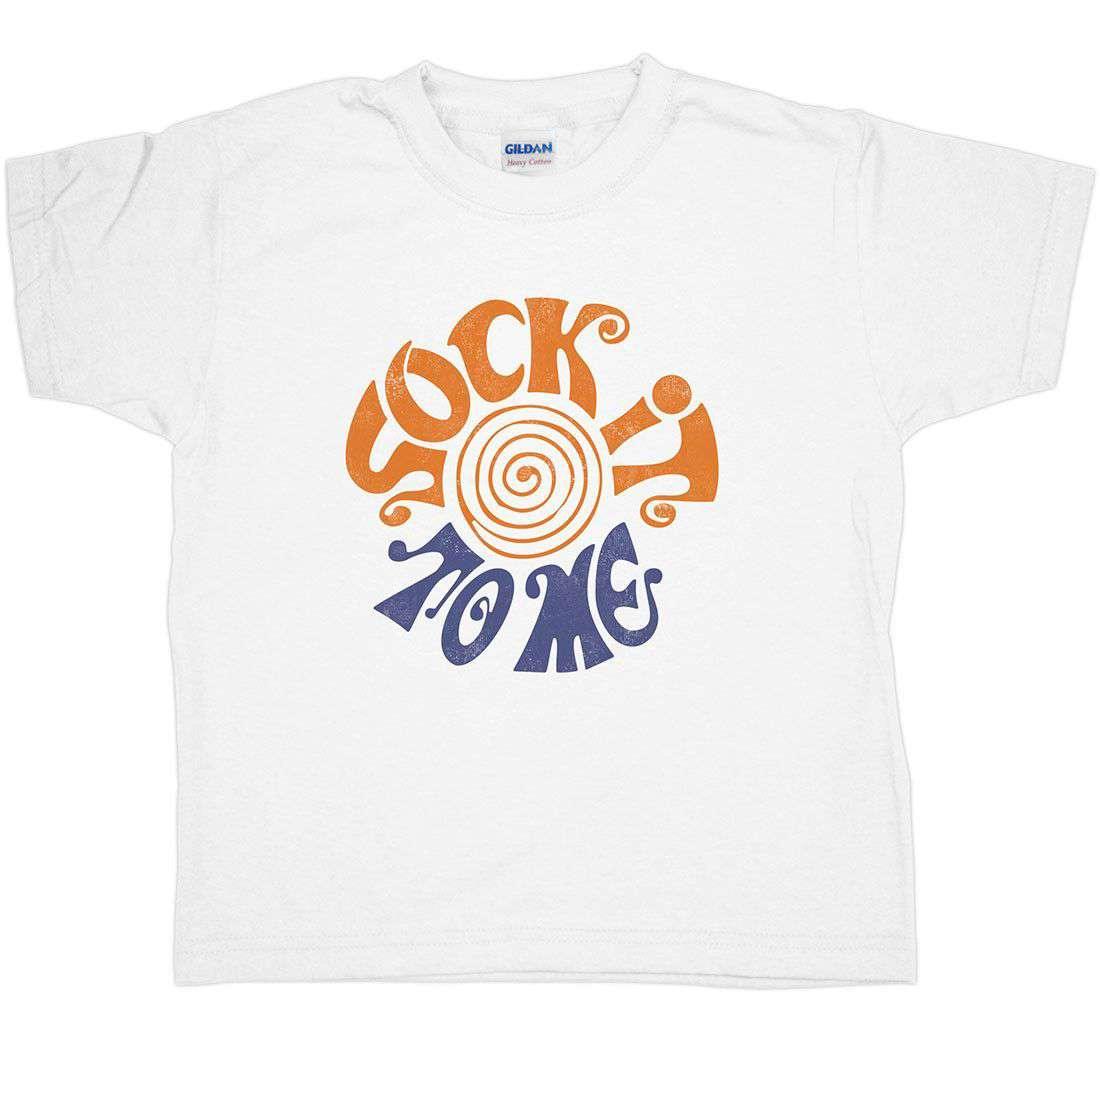 Sock It To Me Childrens Graphic T-Shirt 8Ball